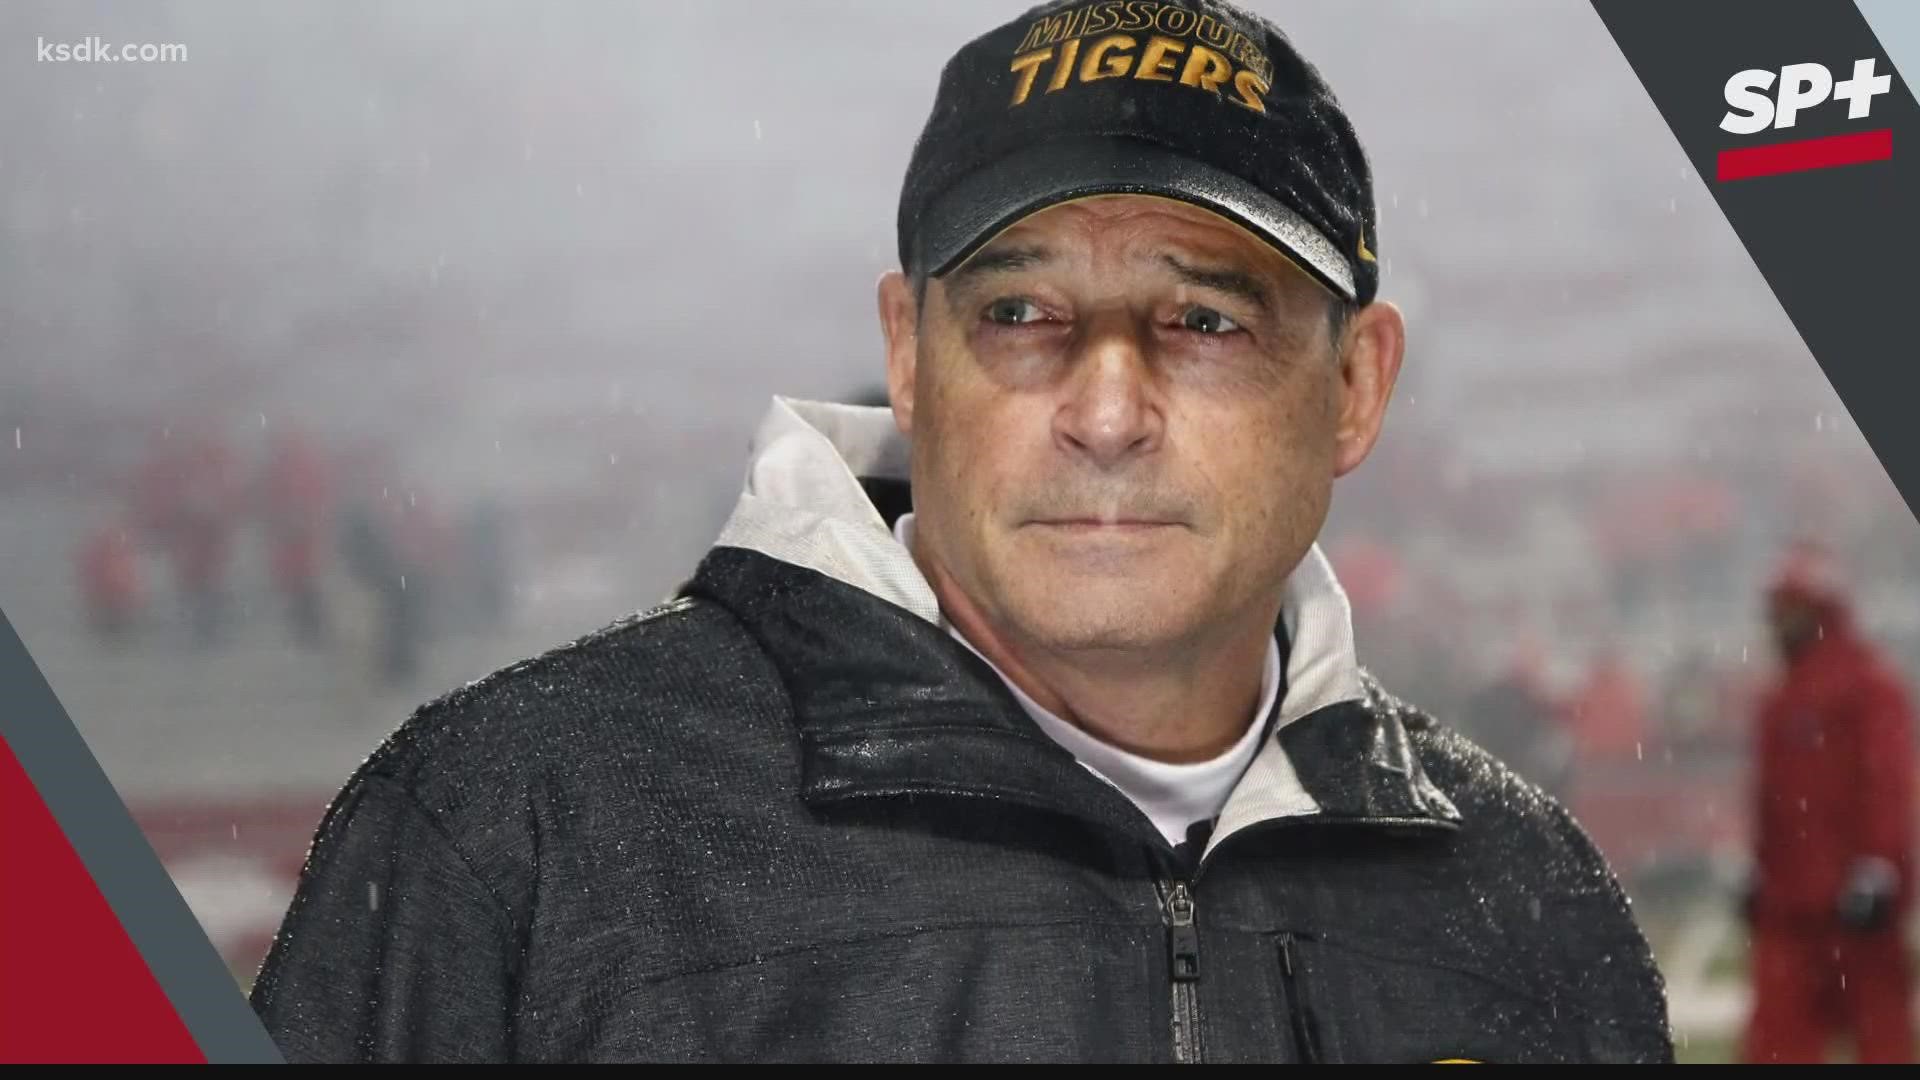 Pinkel is one of the newest members of the National College Football Hall of Fame.